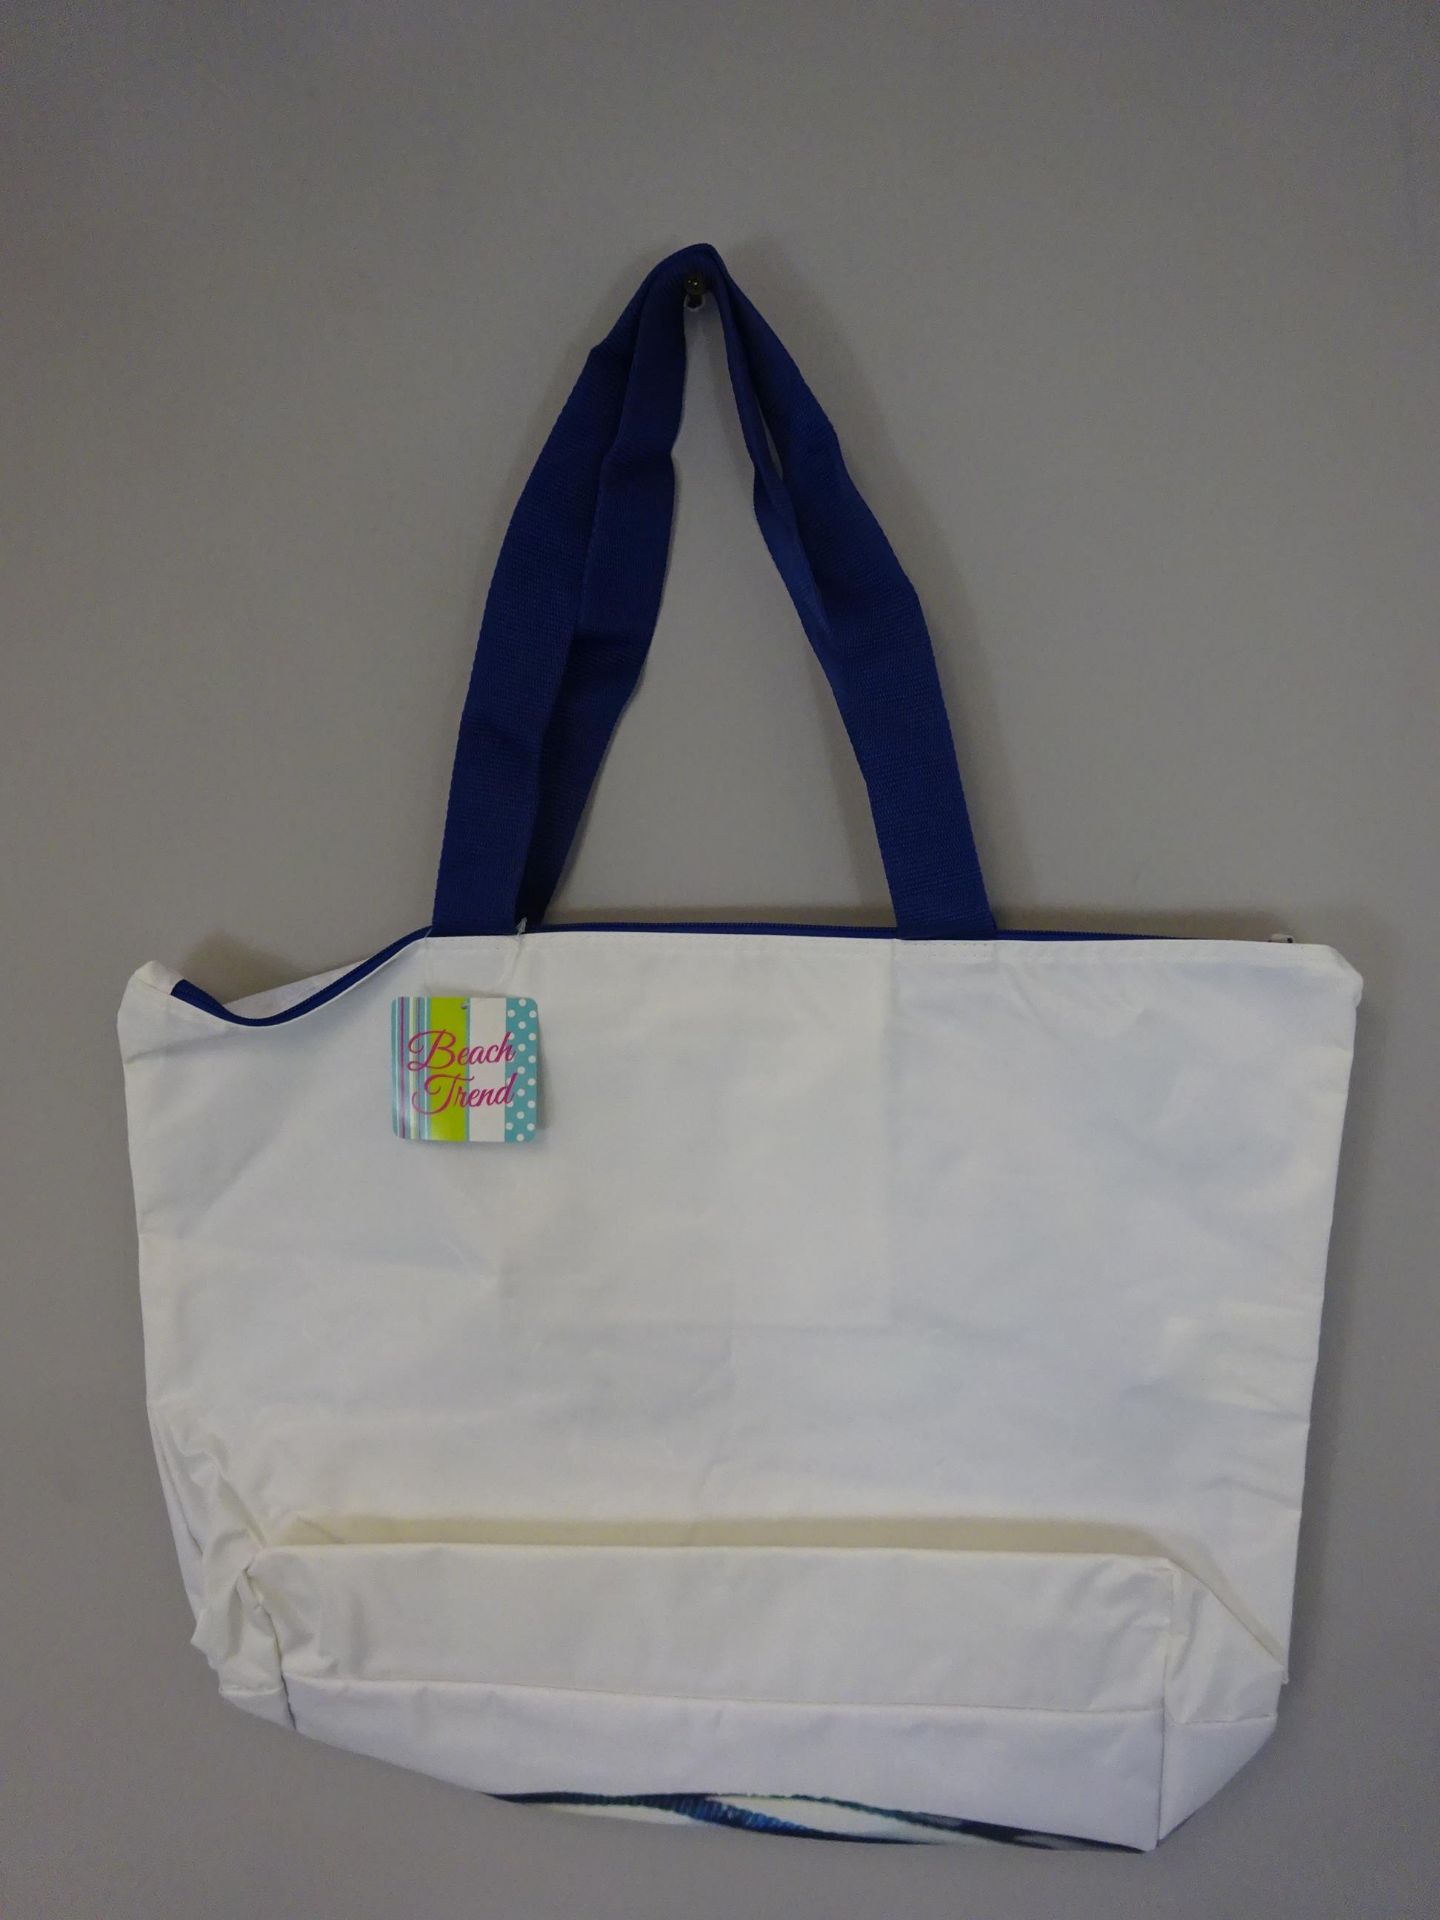 New Stiped Bag Patterened Beach Bag - Image 2 of 2